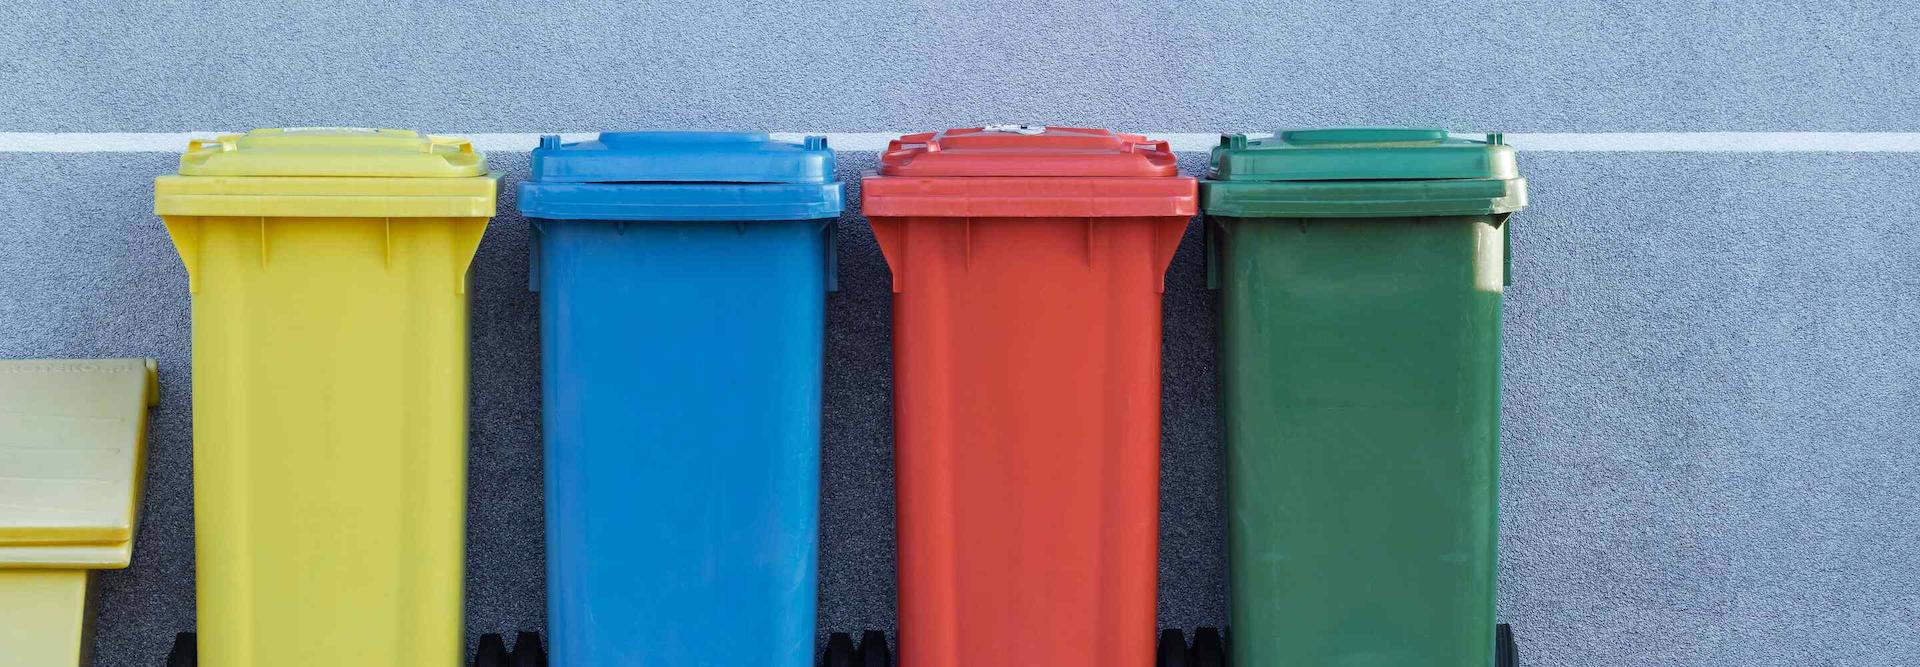 Colorful garbage cans.